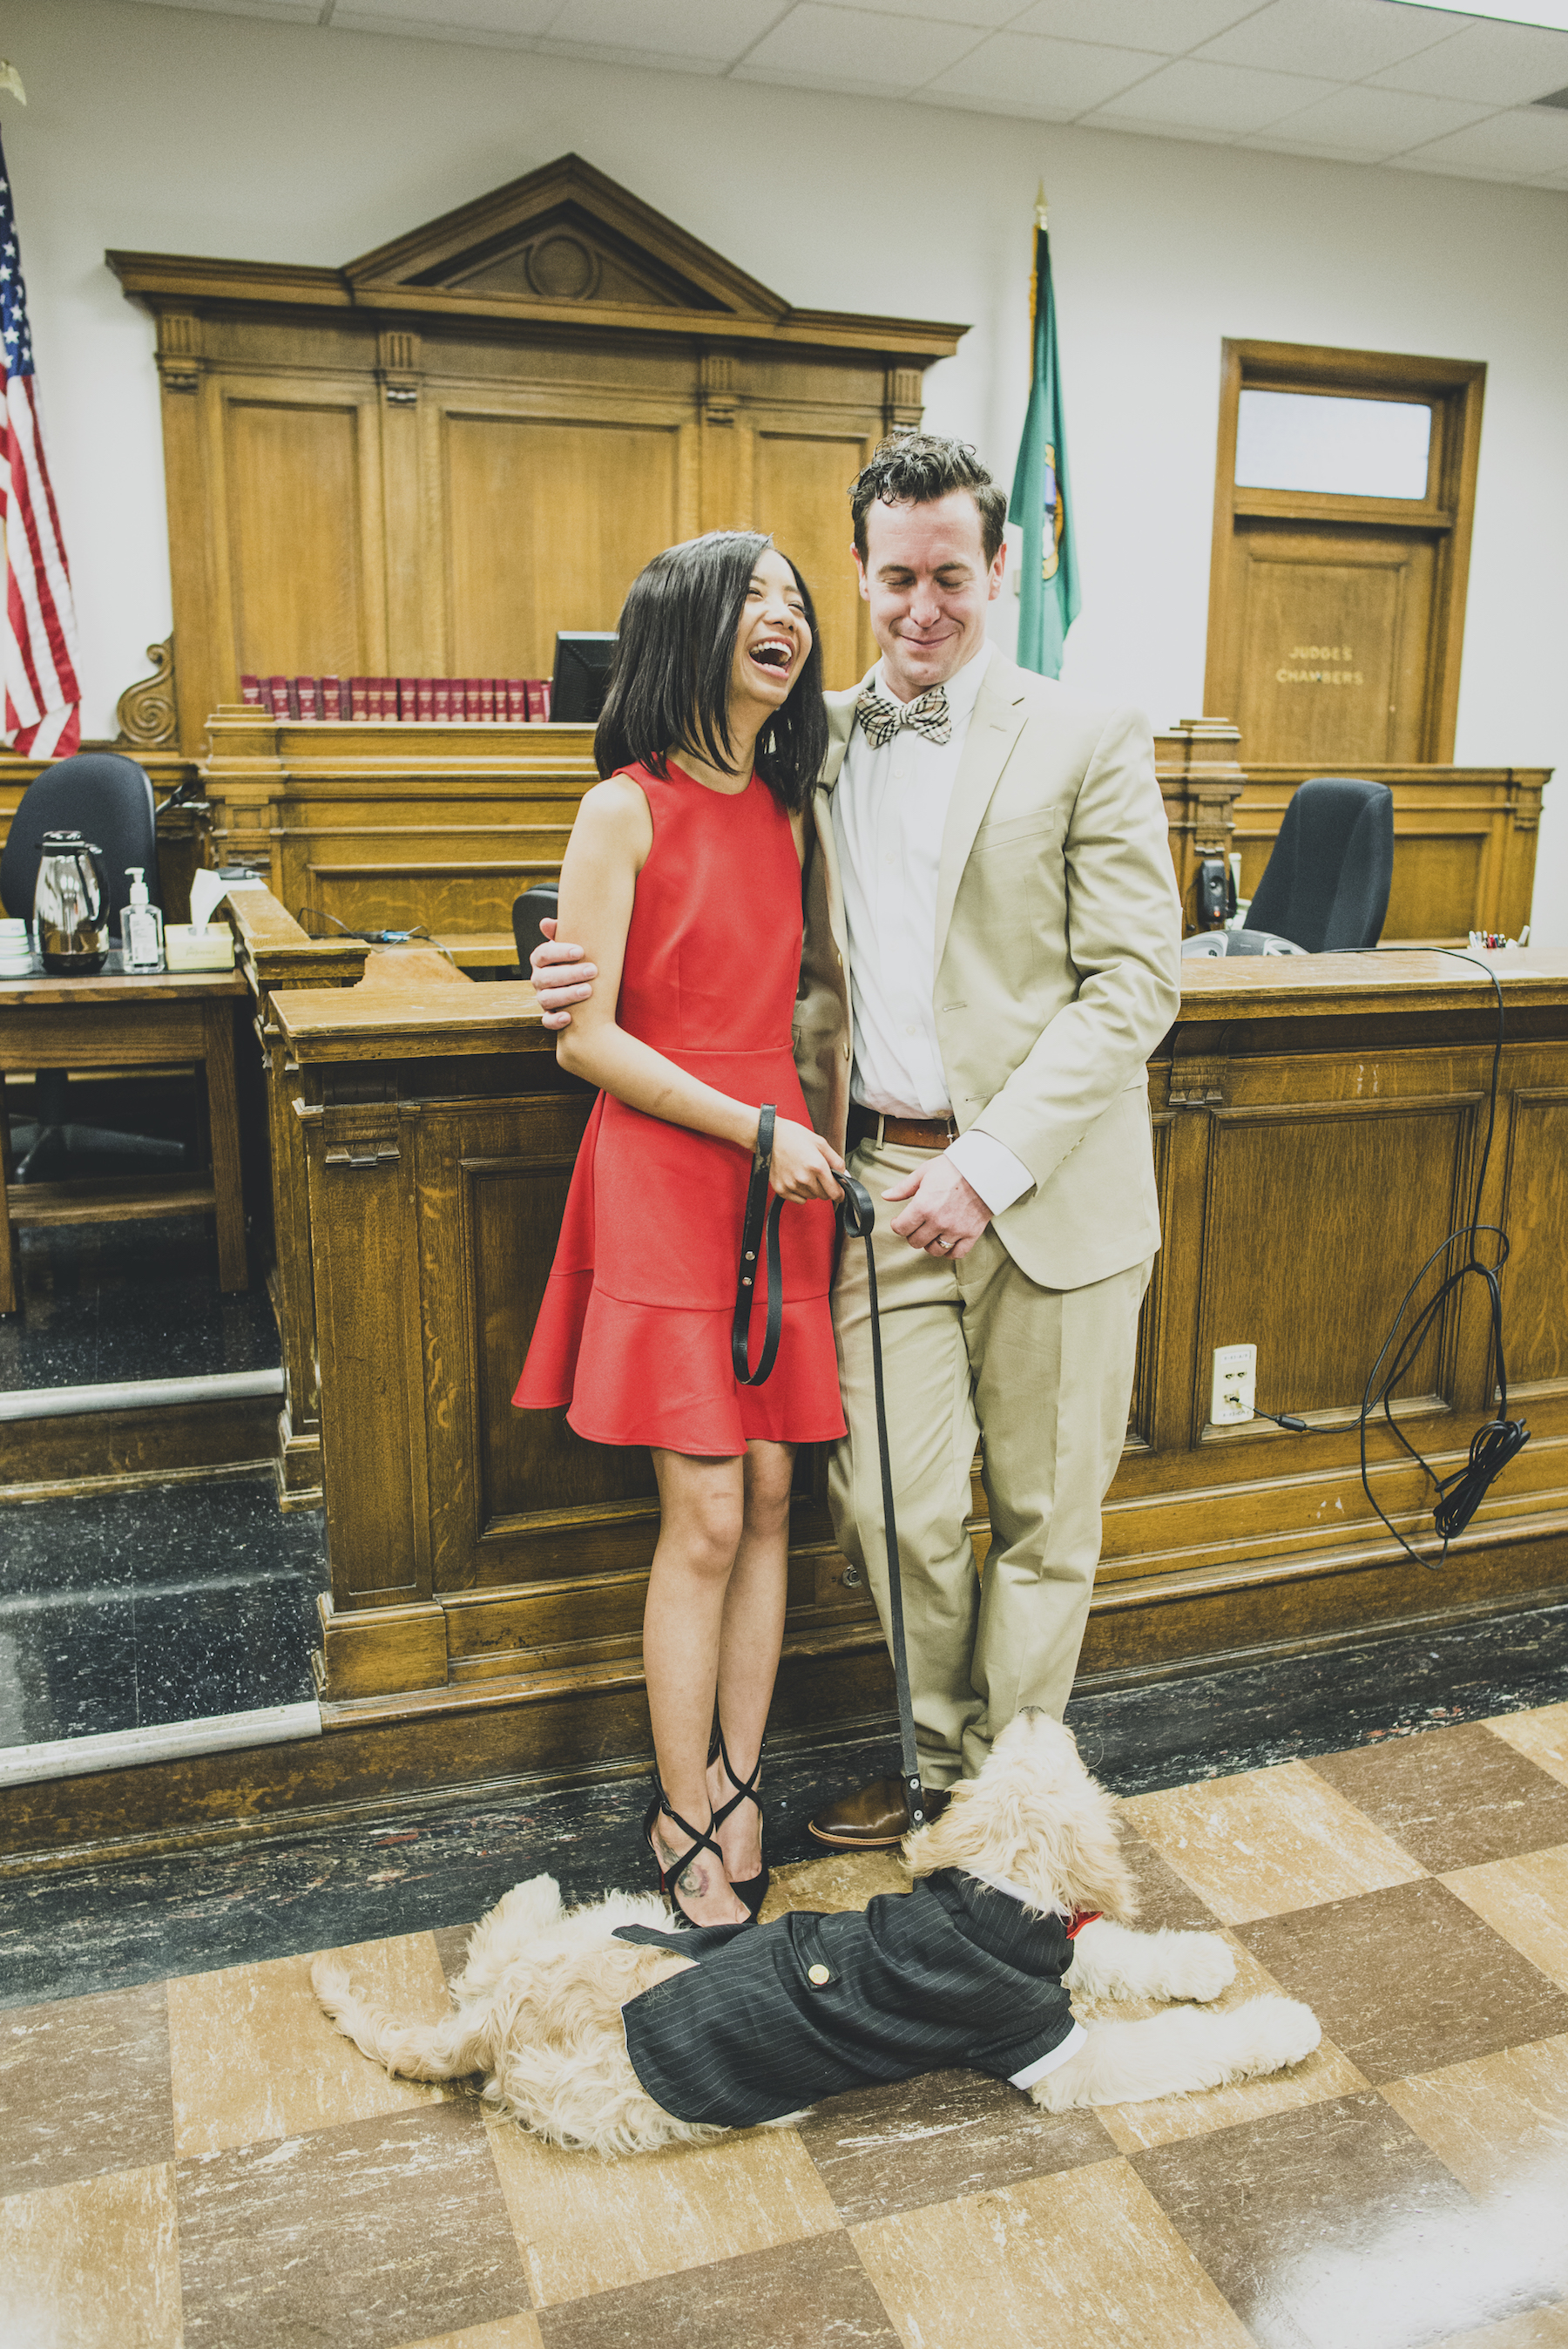 photography_by_jane_speleers_2017_seattle_court_house_wedding-dsc_9134